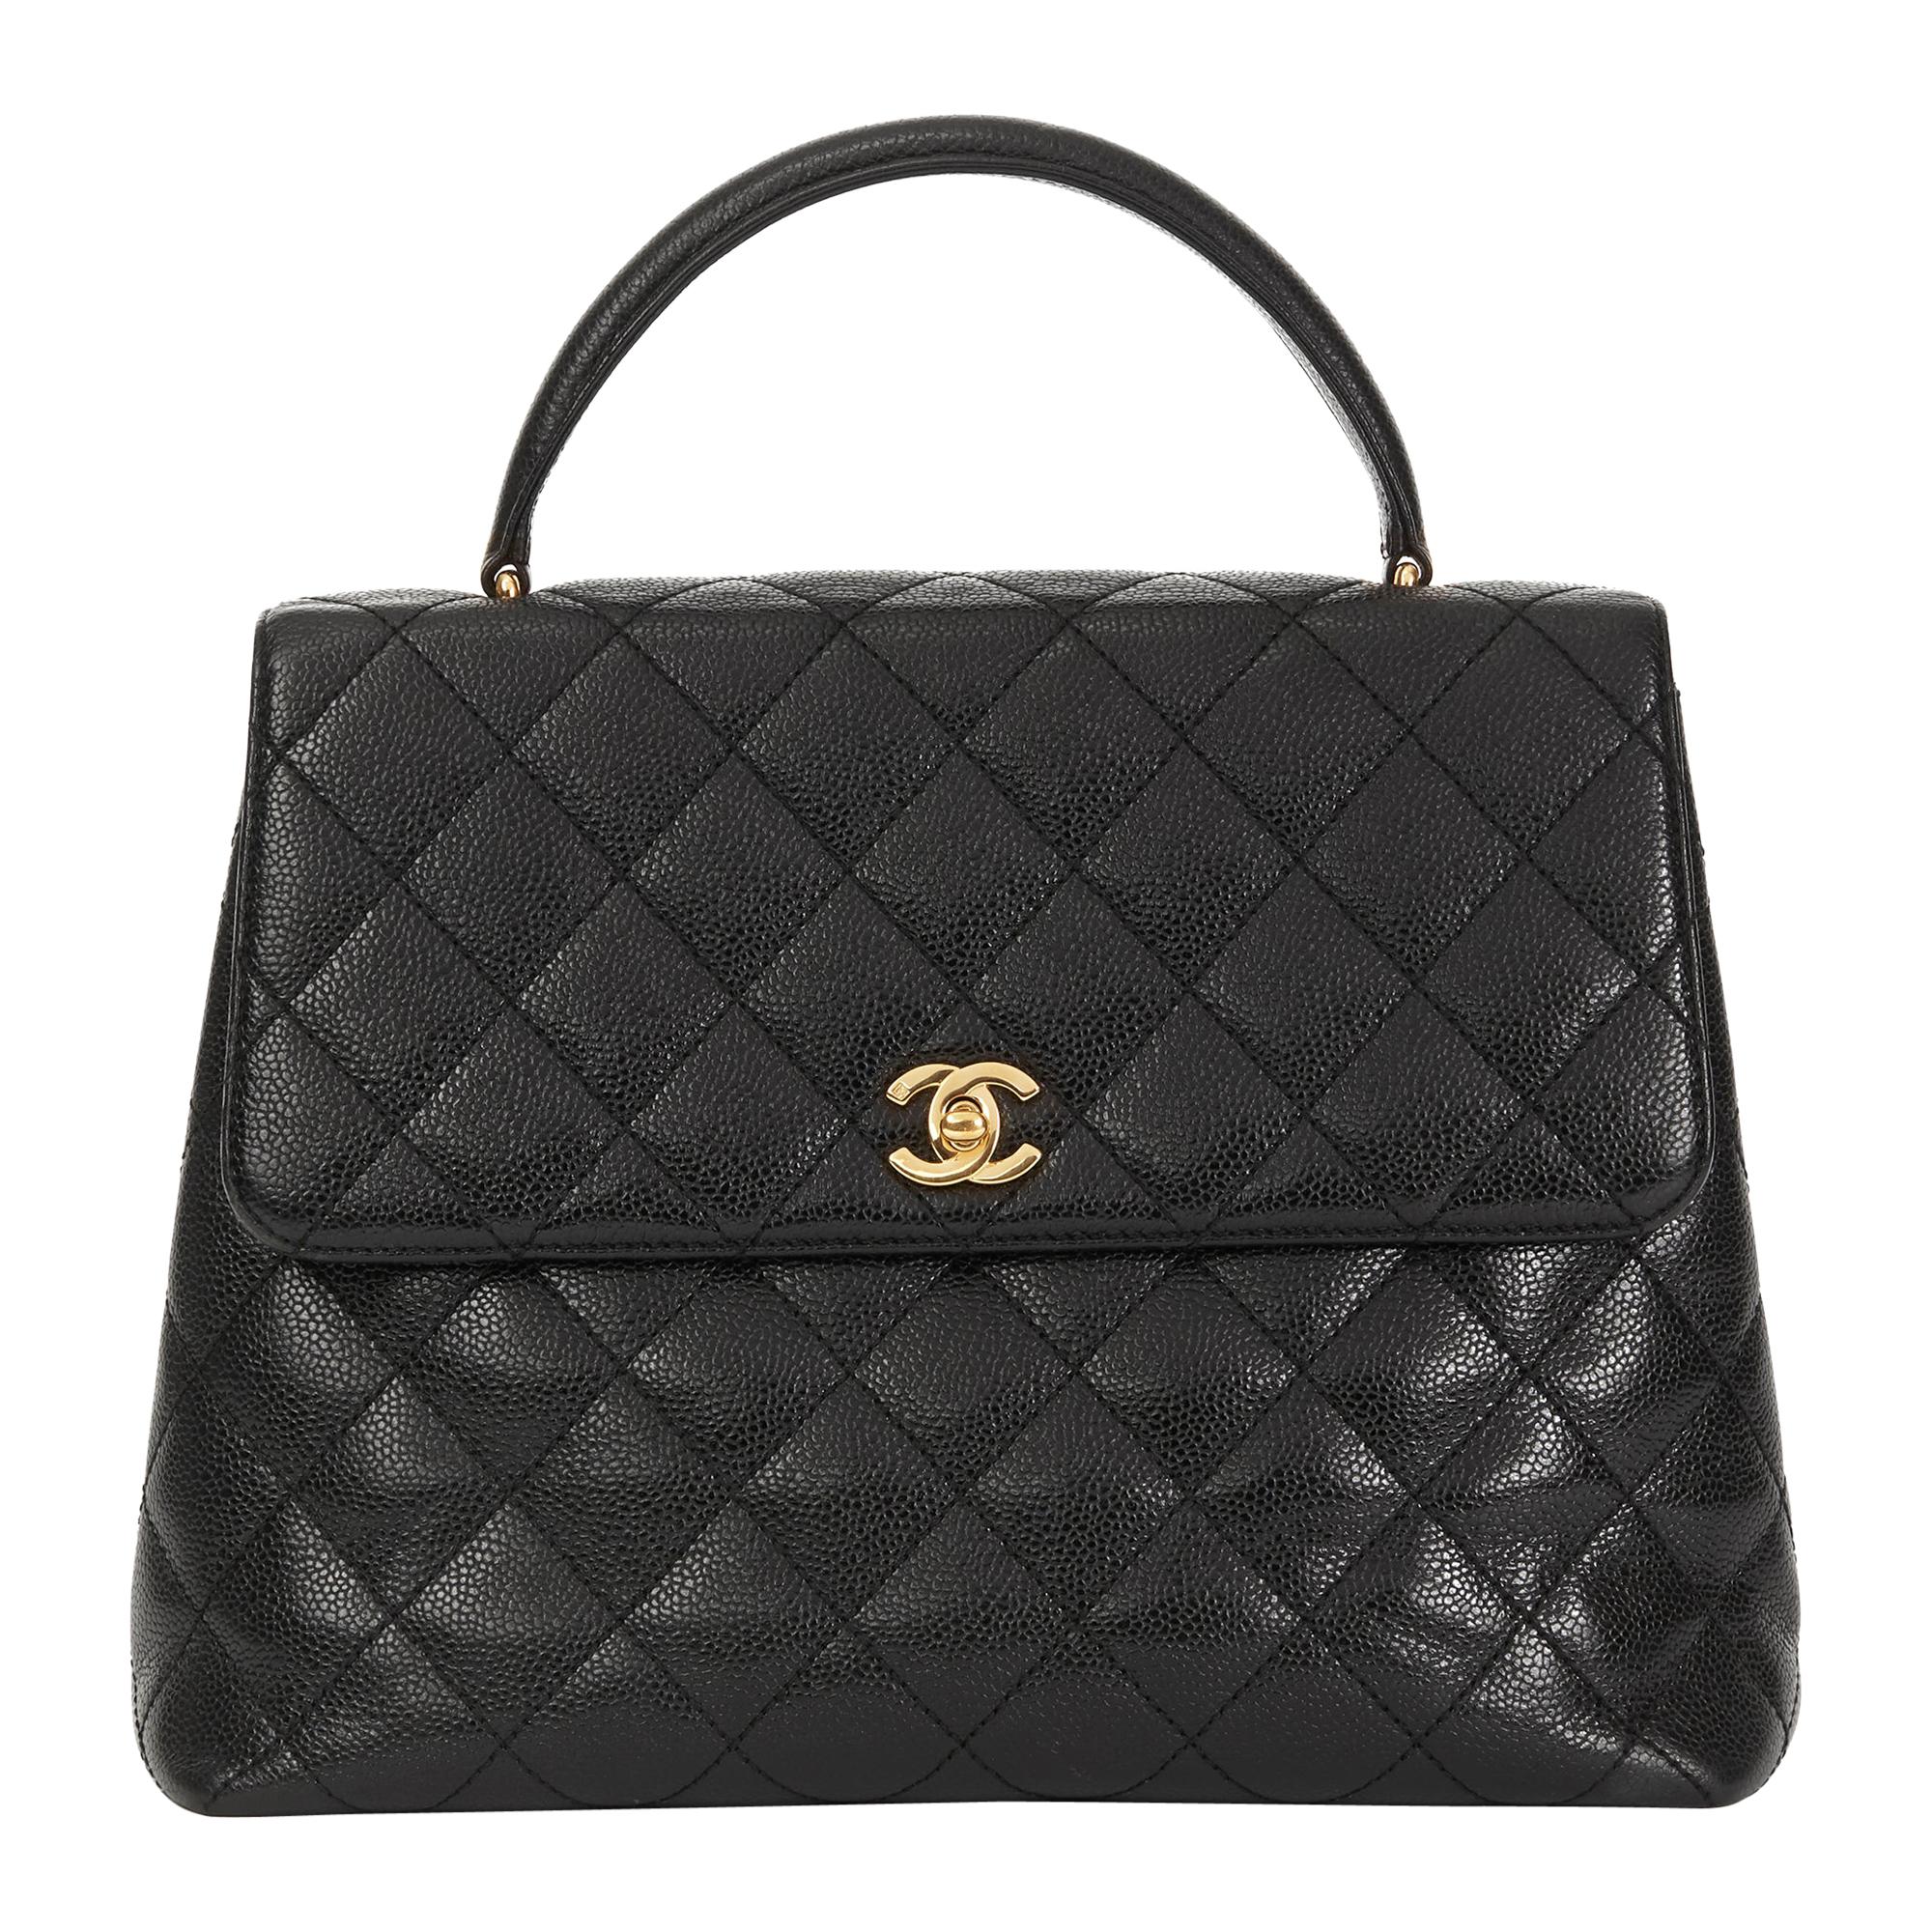 2002 Chanel Black Quilted Caviar Leather Timeless Kelly